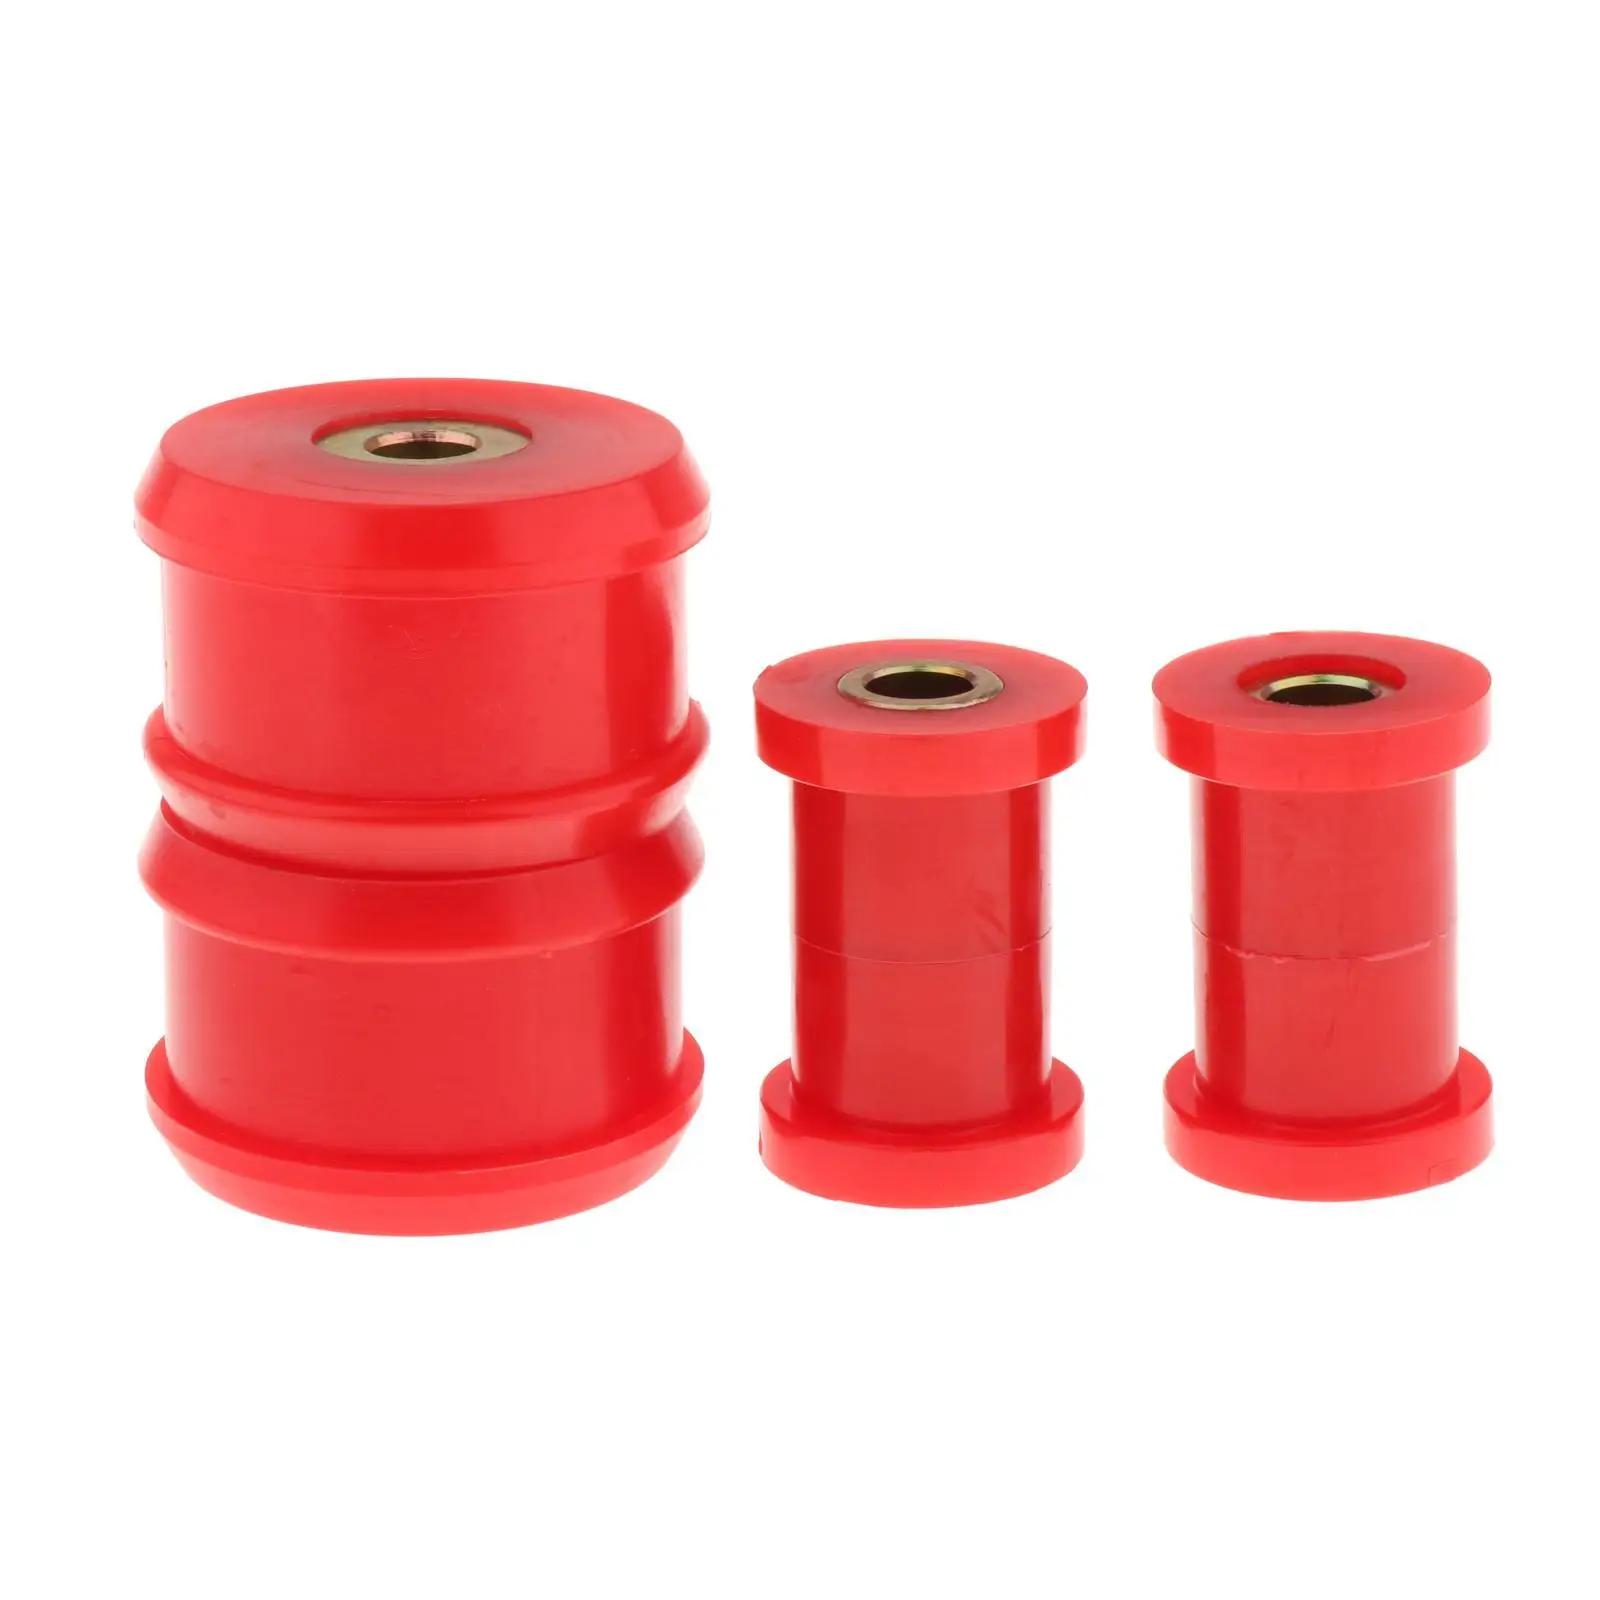 Front Control Arm Bushing Kit Part No. 22-202 Fit for  Beetle MK4 98-06